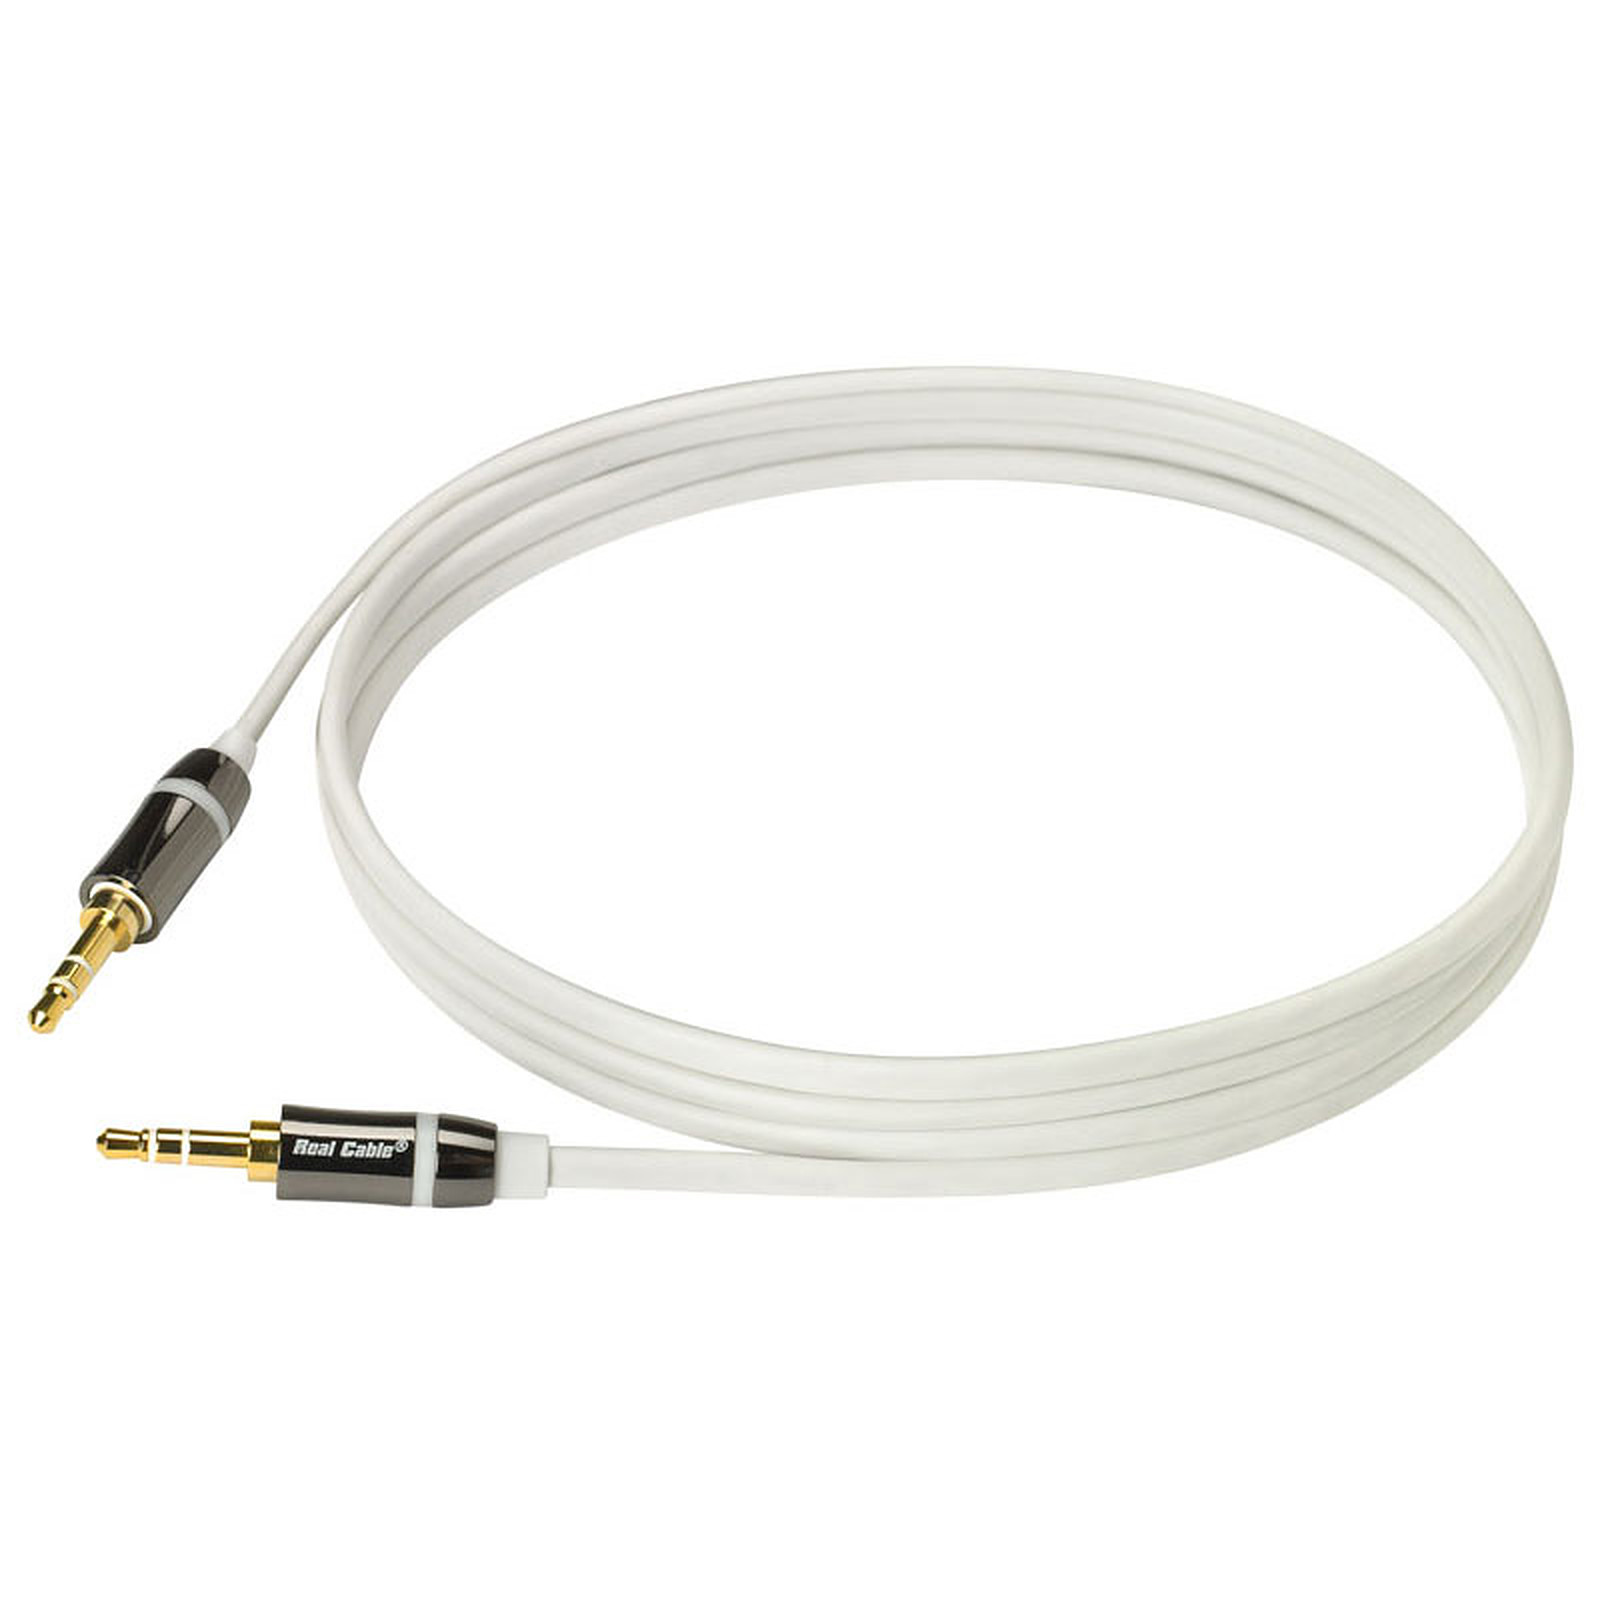 Real Cable iPlug J35M - Cable audio Jack Real Cable